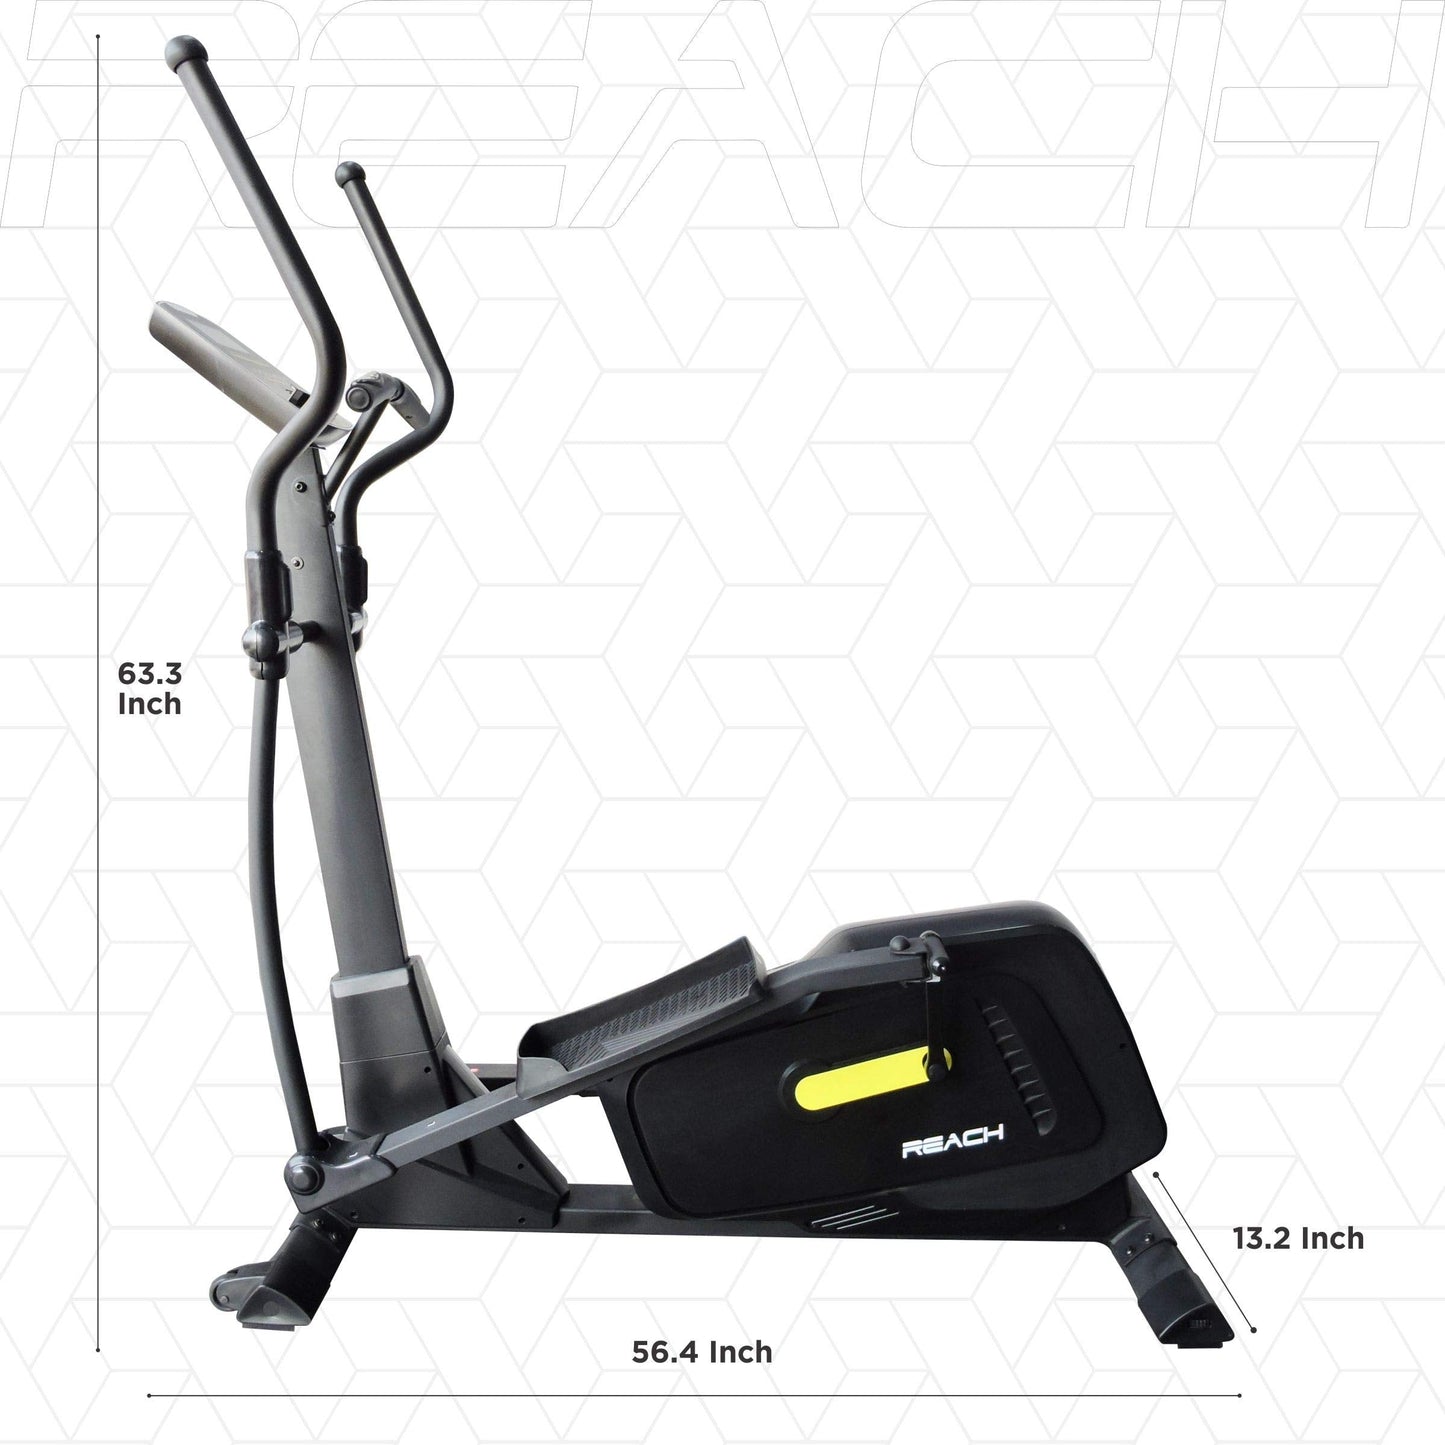 REACH C-500 Elliptical Cross Trainer Machine for Cardio Fitness Strength Conditioning Workout at Home or Gym Exercise  8 Kg Flywheel